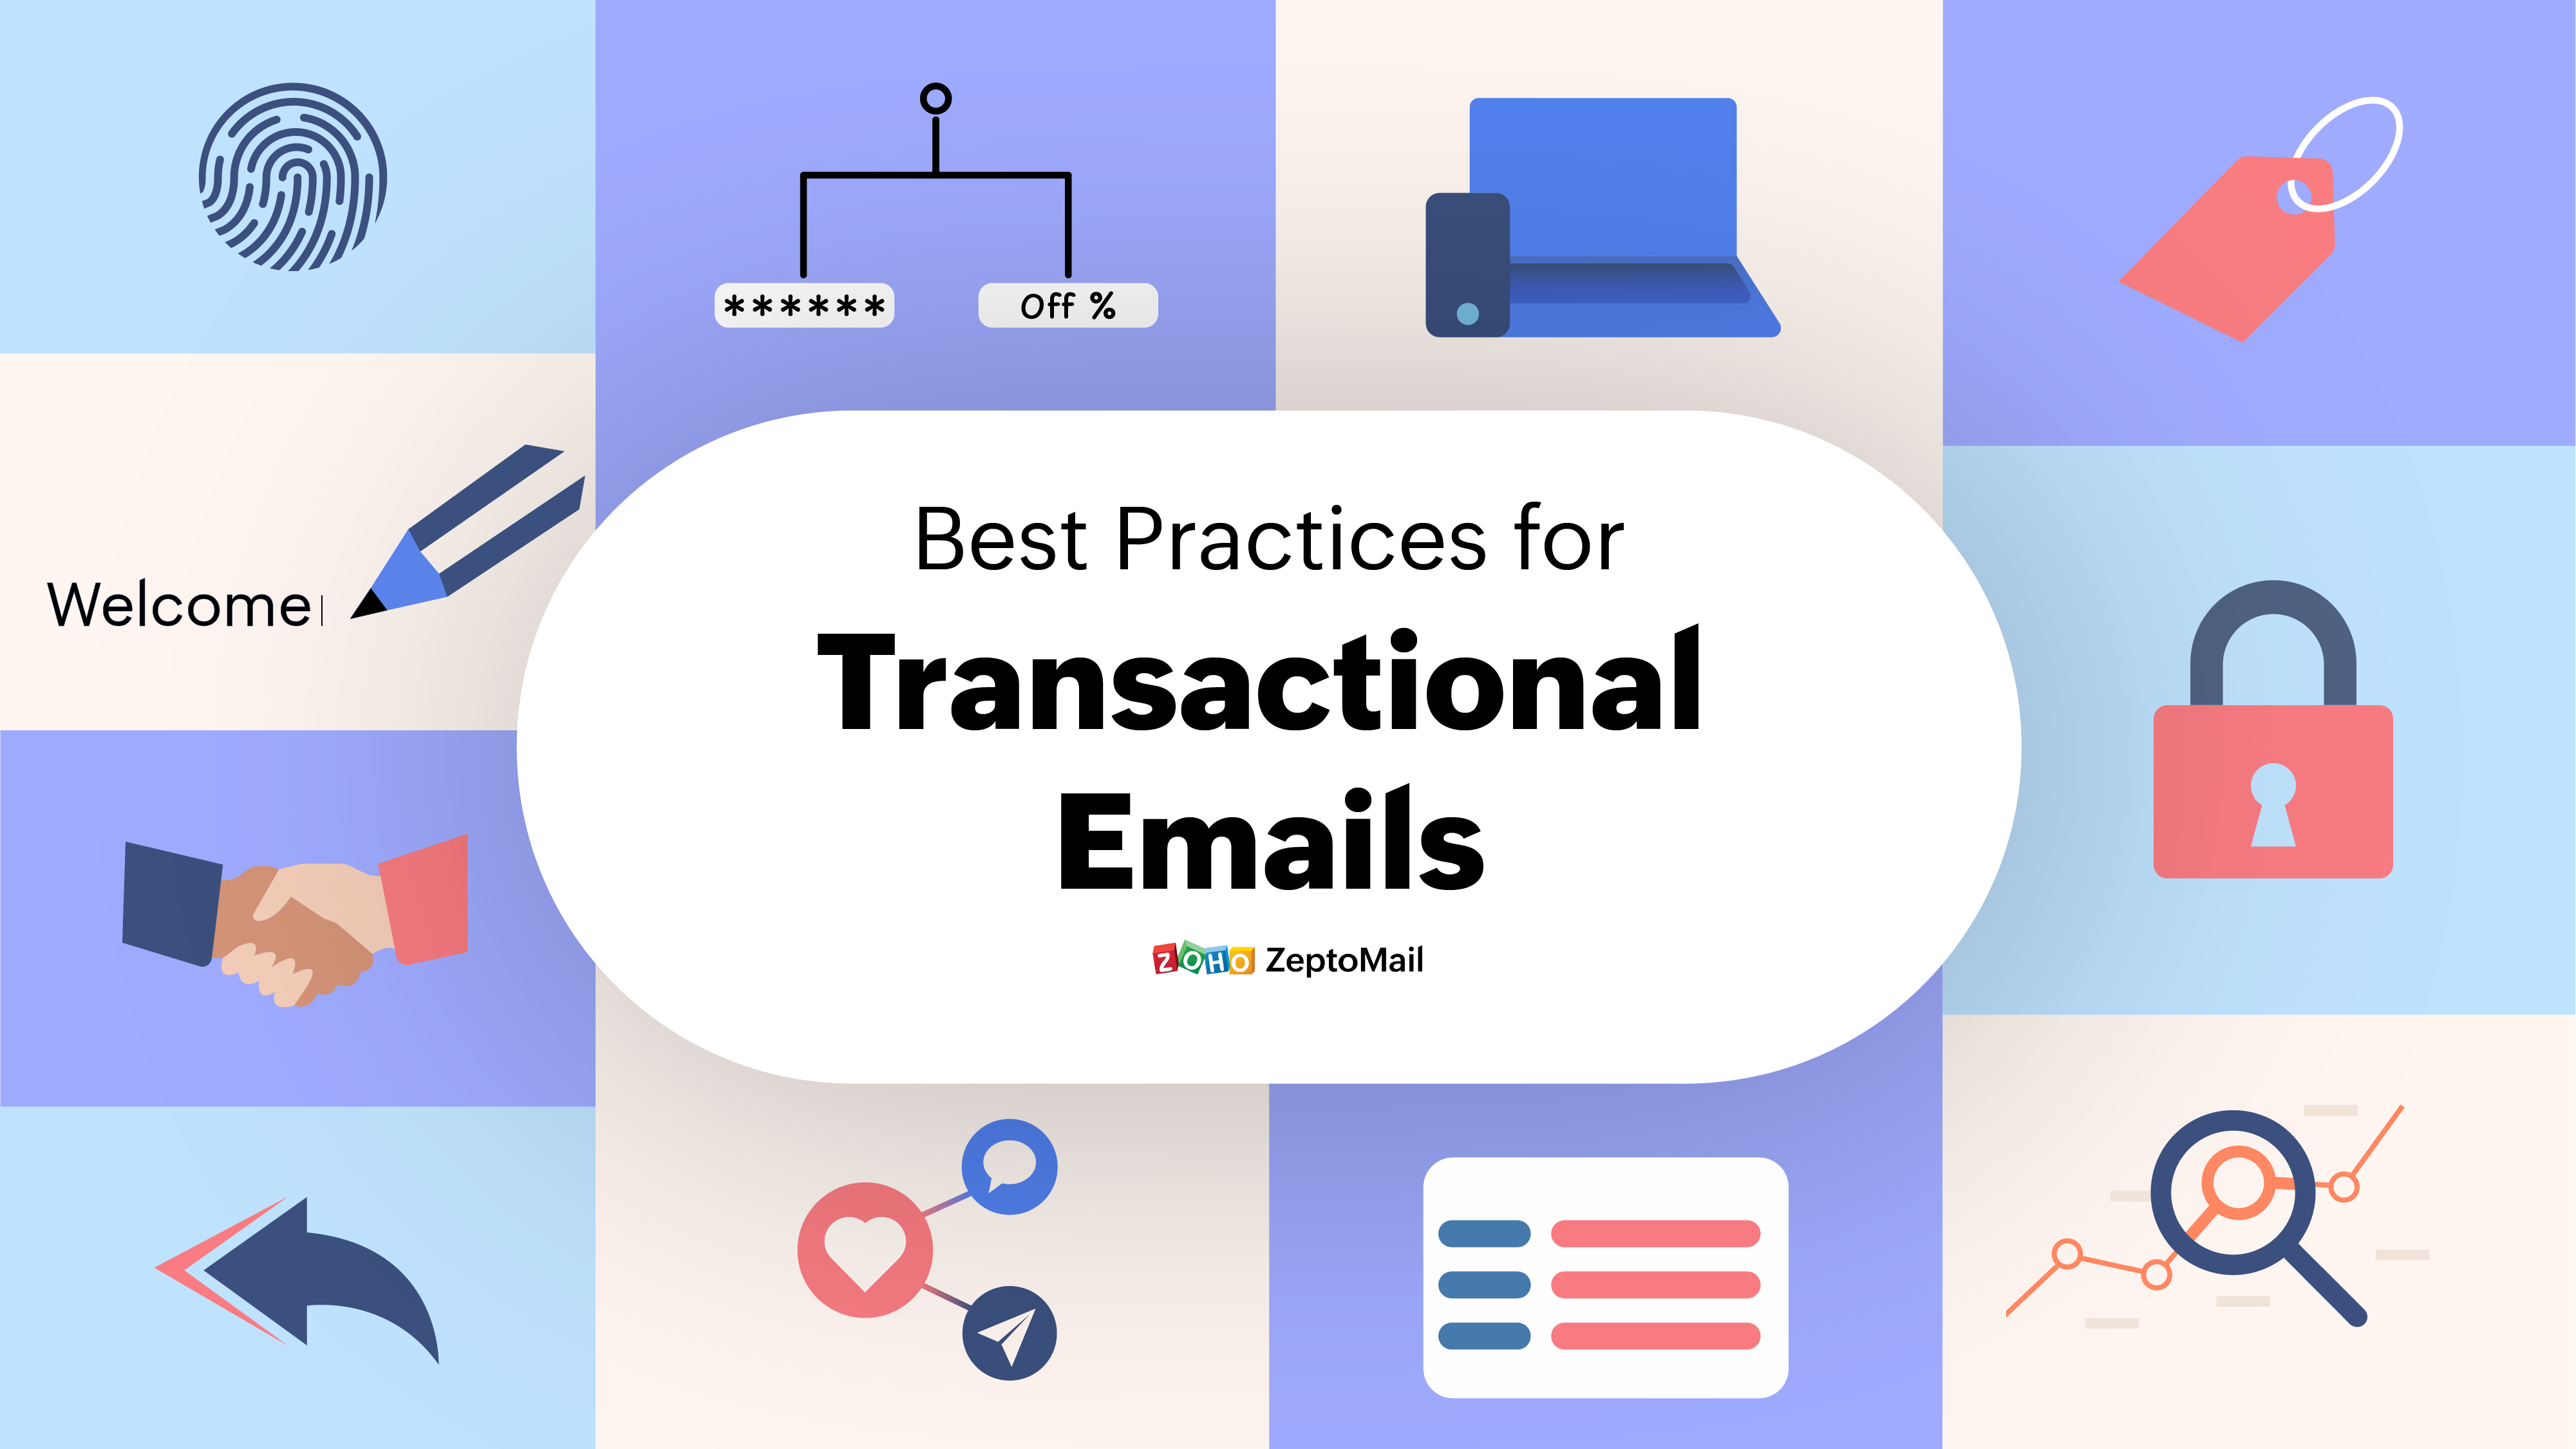 Best Practices for Transactional emails